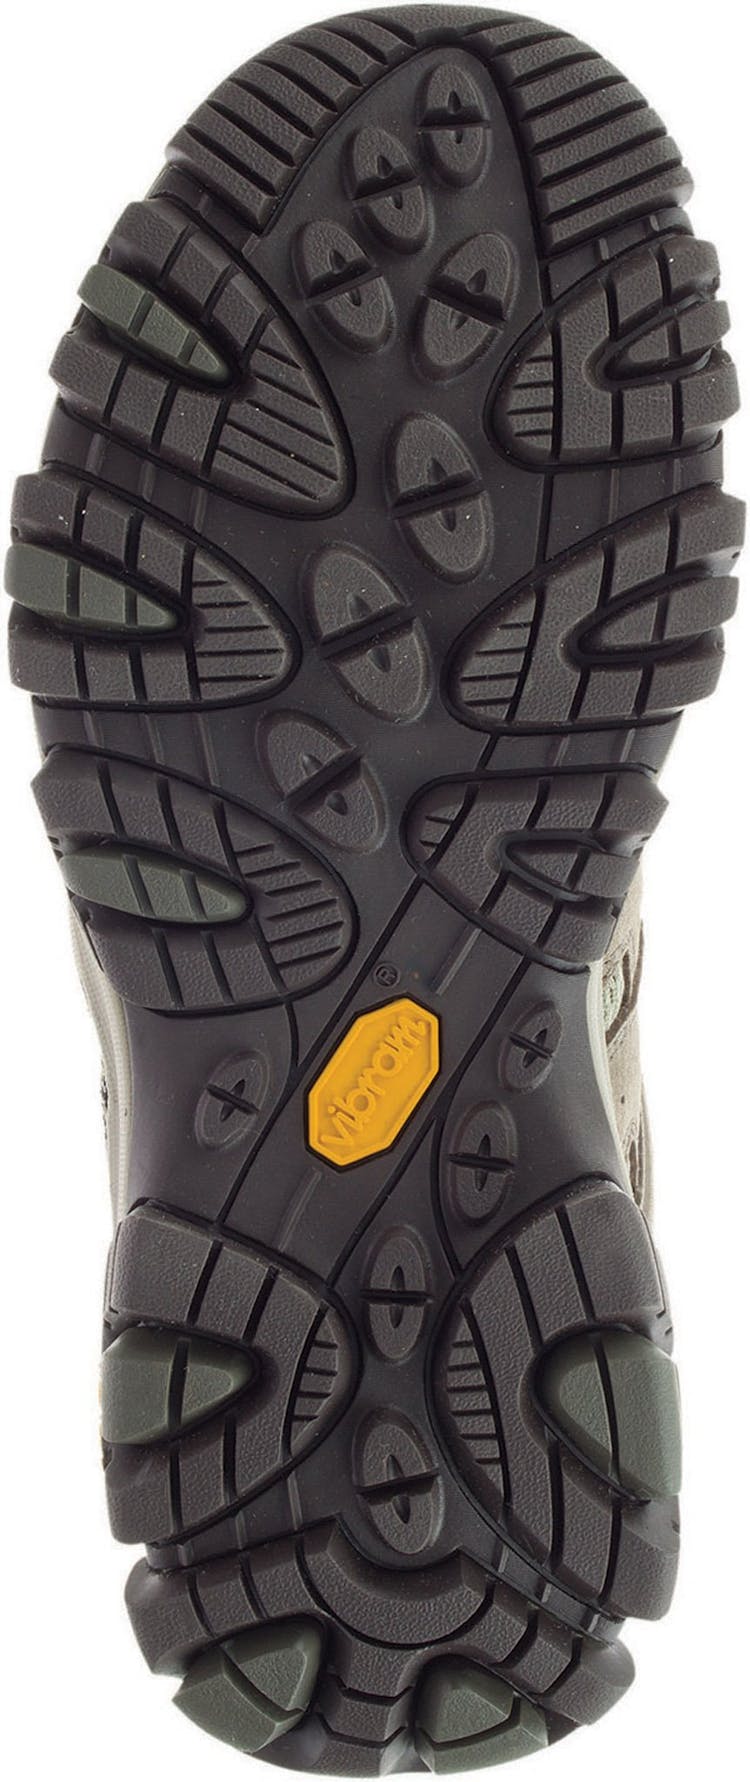 Product gallery image number 4 for product Moab 3 Mid Waterproof Shoes - Women's